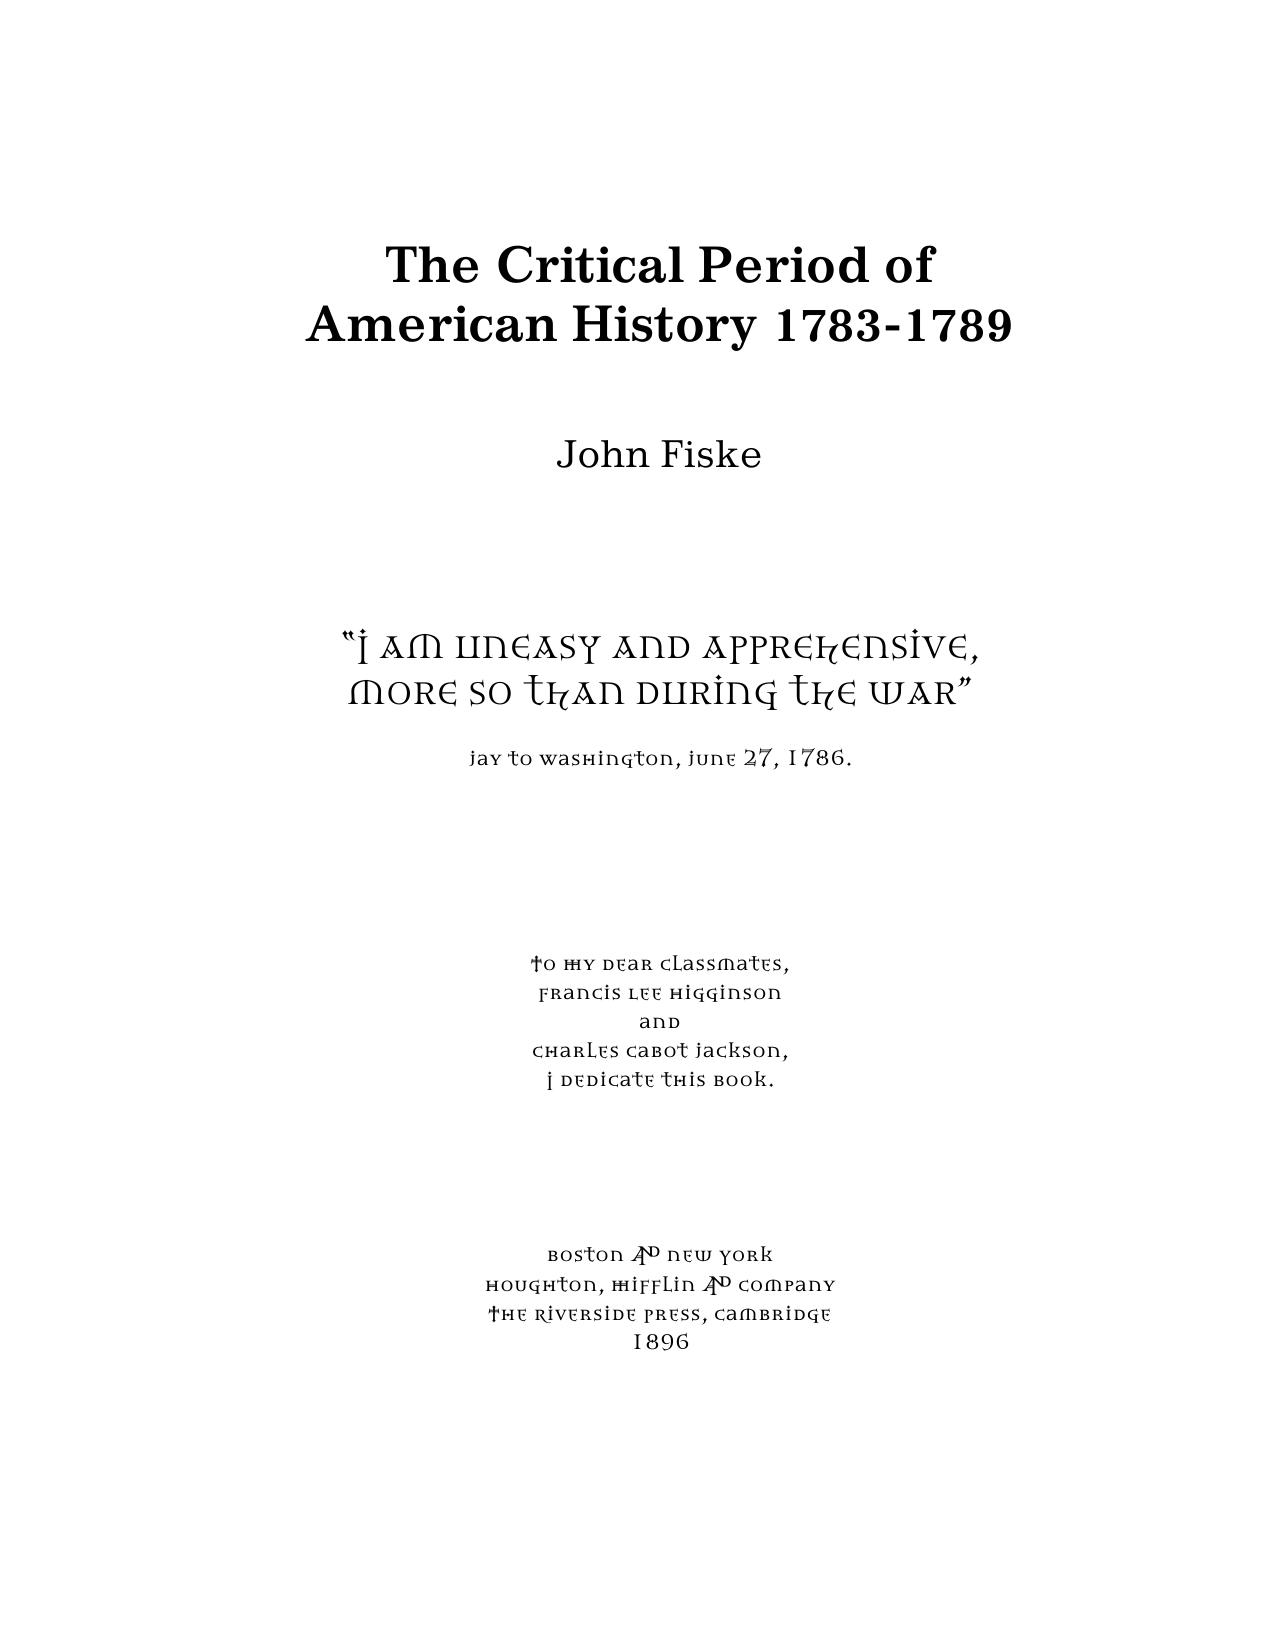 The critical period of American history, 1783-1789